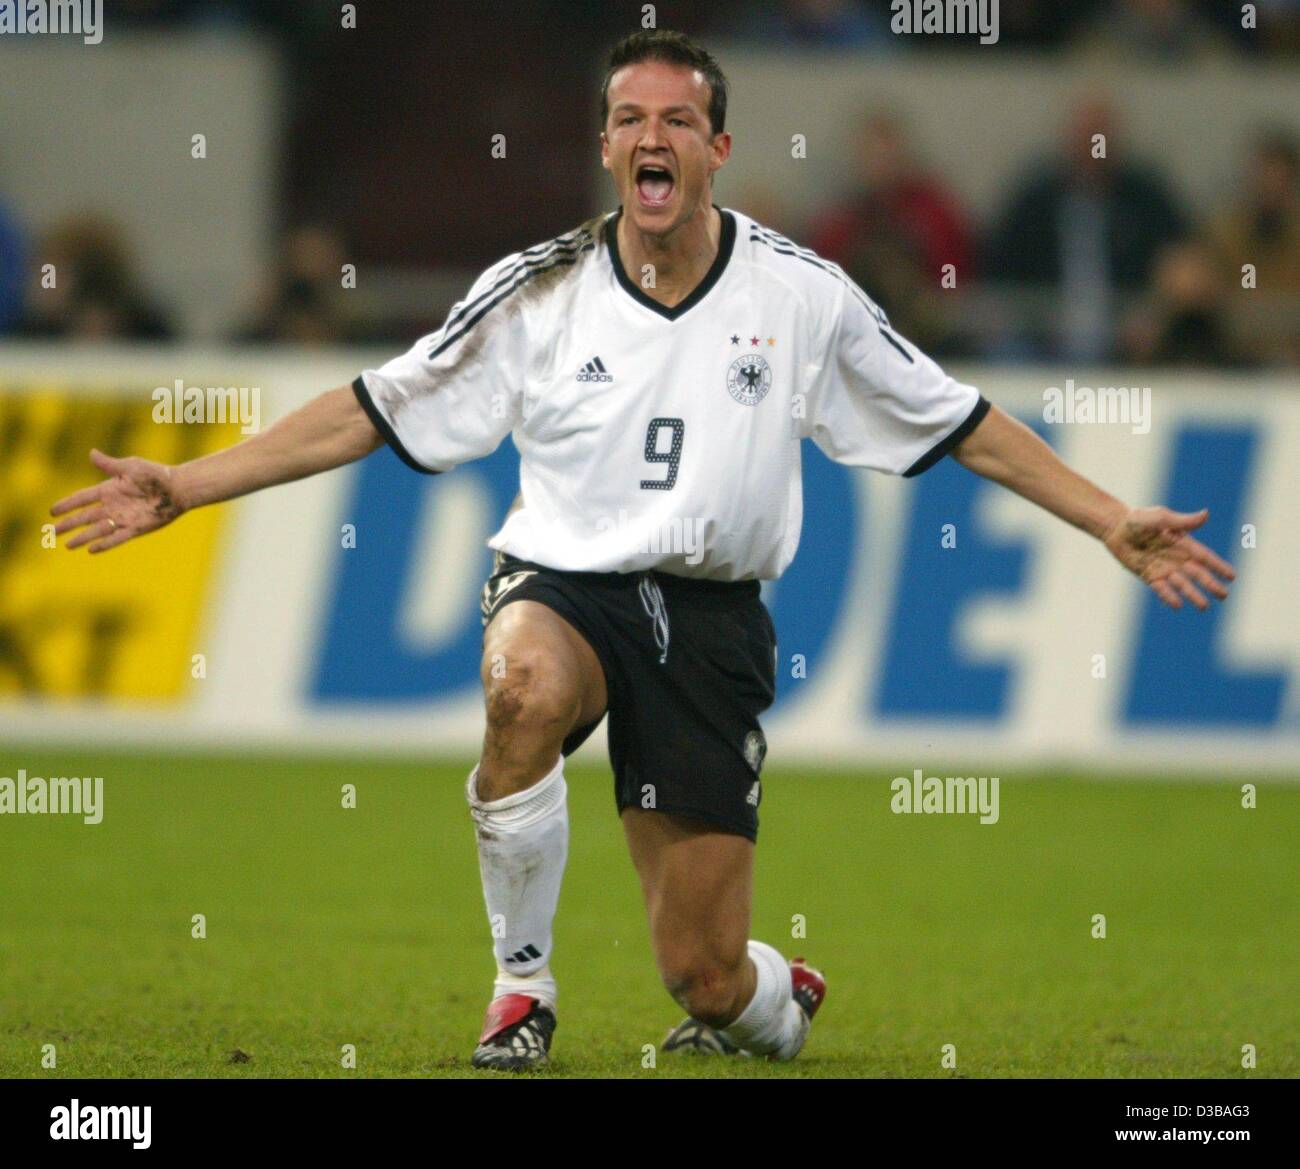 (dpa) - German Fredi Bobic demands a penalty shot after being fouled during the international friendly soccer match Germany against Netherlands in Gelsenkirchen, Germany, 20 November 2002. Holland went on to win 3-1. It is Germany's first defeat since the World Cup final. Stock Photo